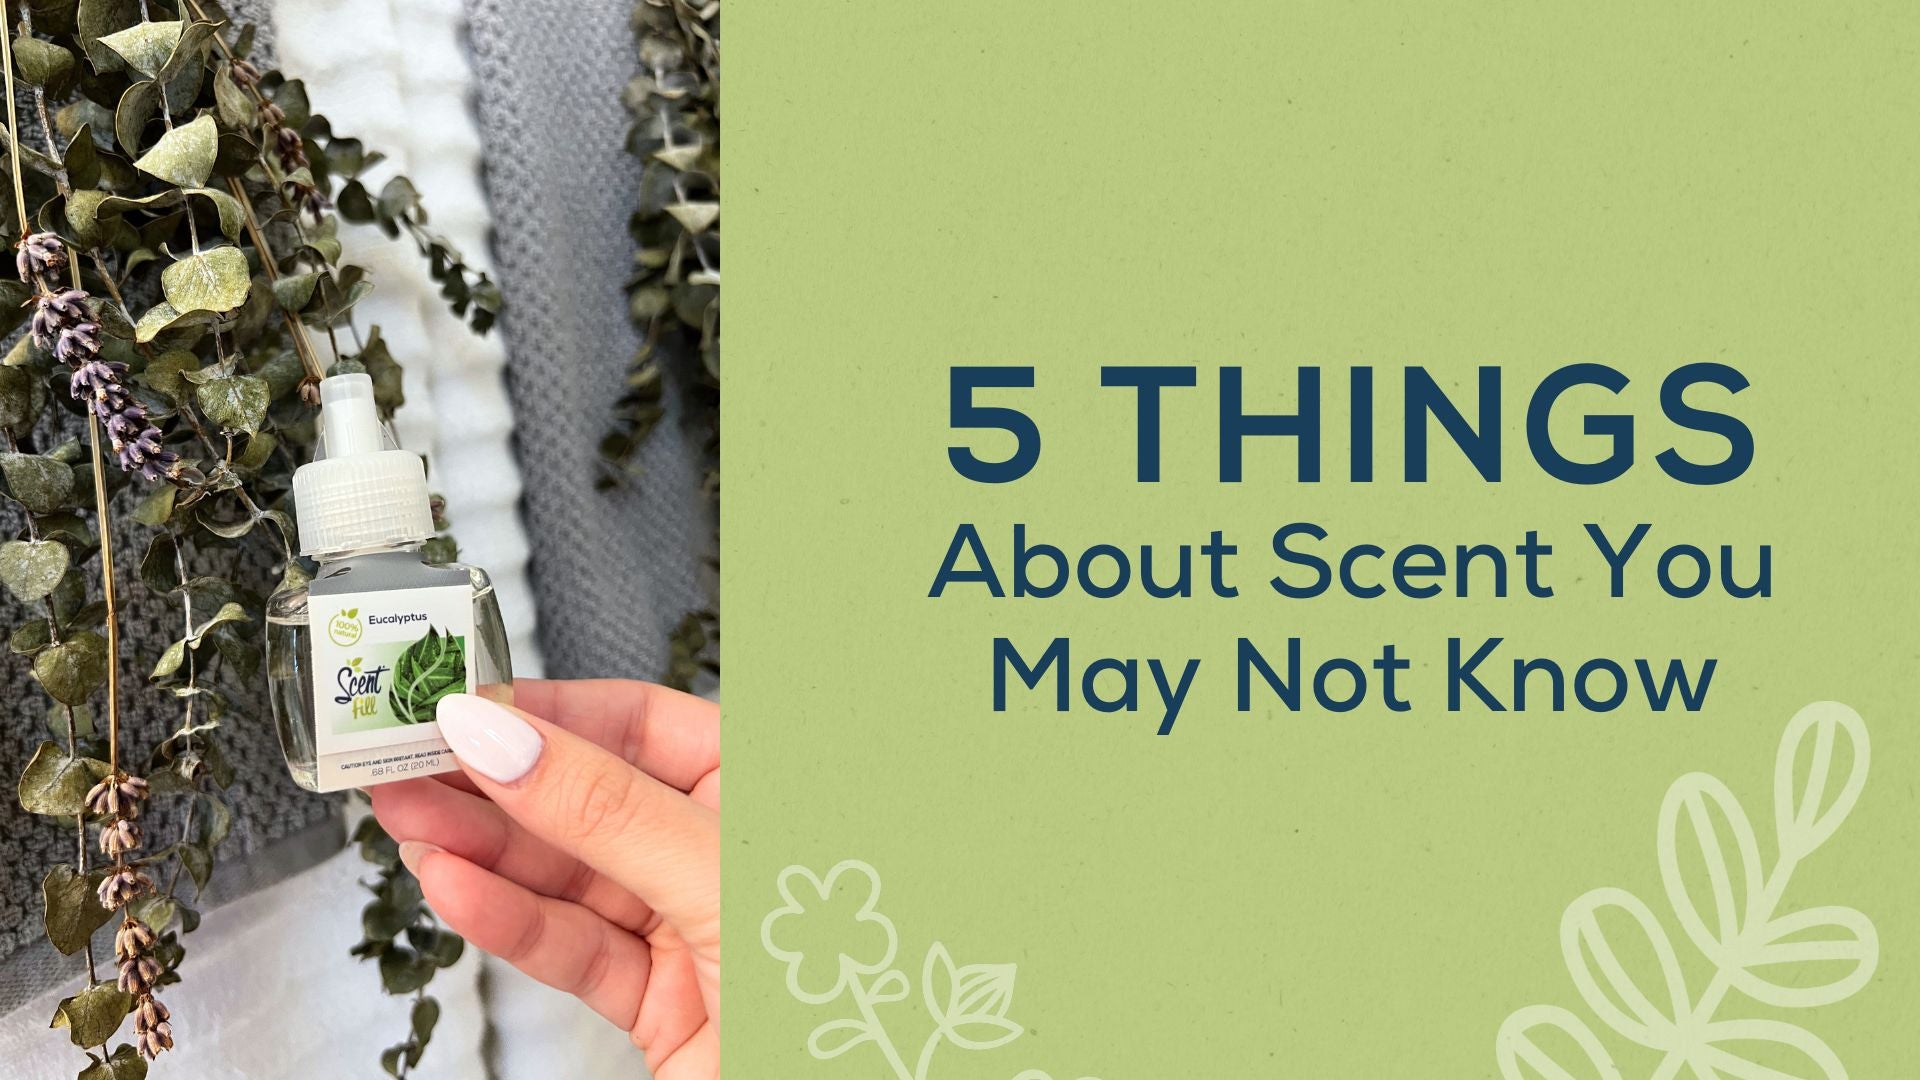 5 Things About Scent You May Not Know